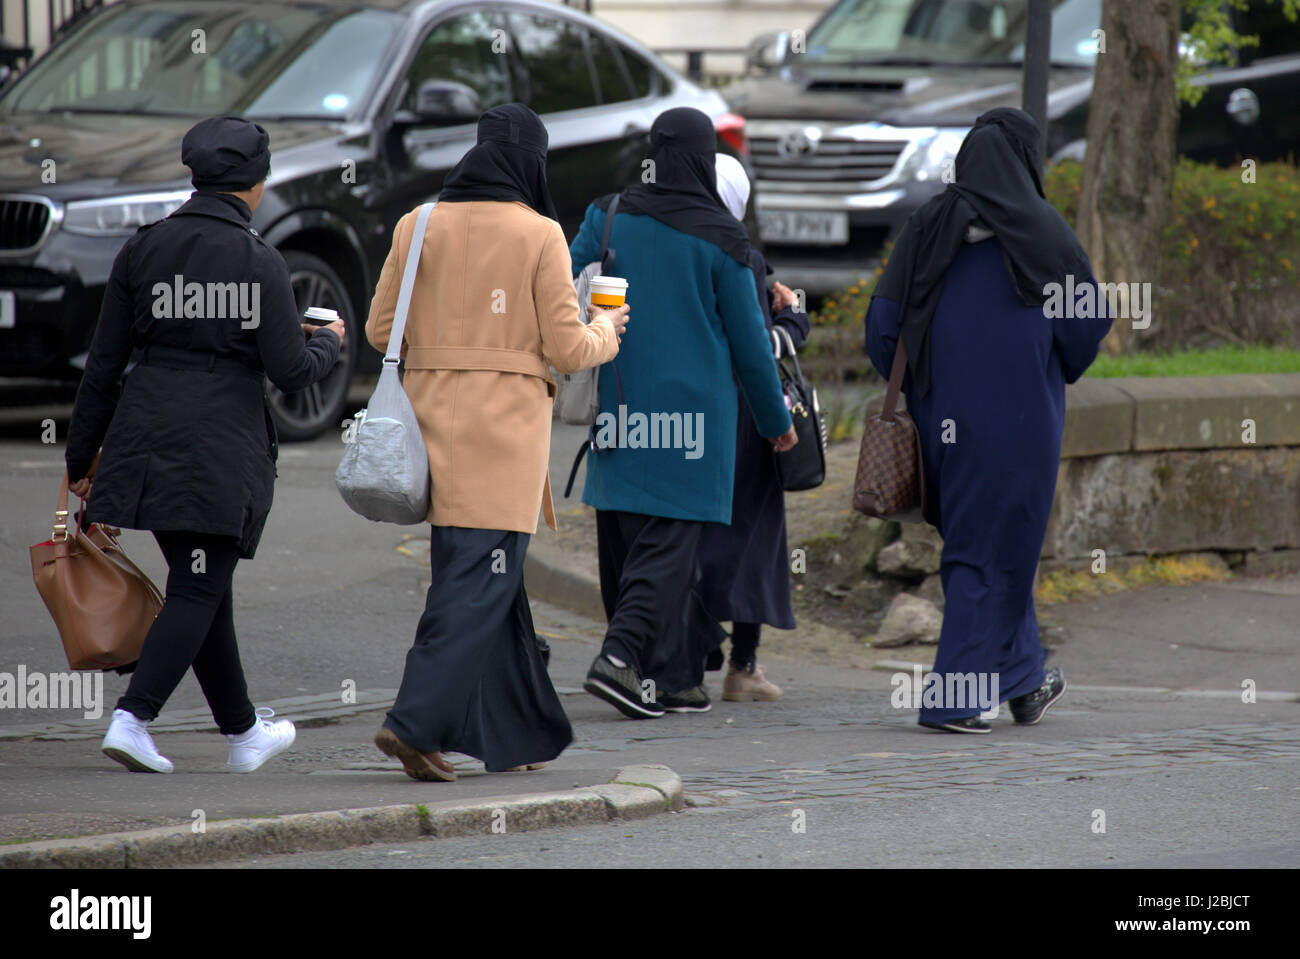 Asian African refugee dressed  burka Hijab scarf on street in the UK everyday scene five  young girls walking in crowd drinking coffee Stock Photo